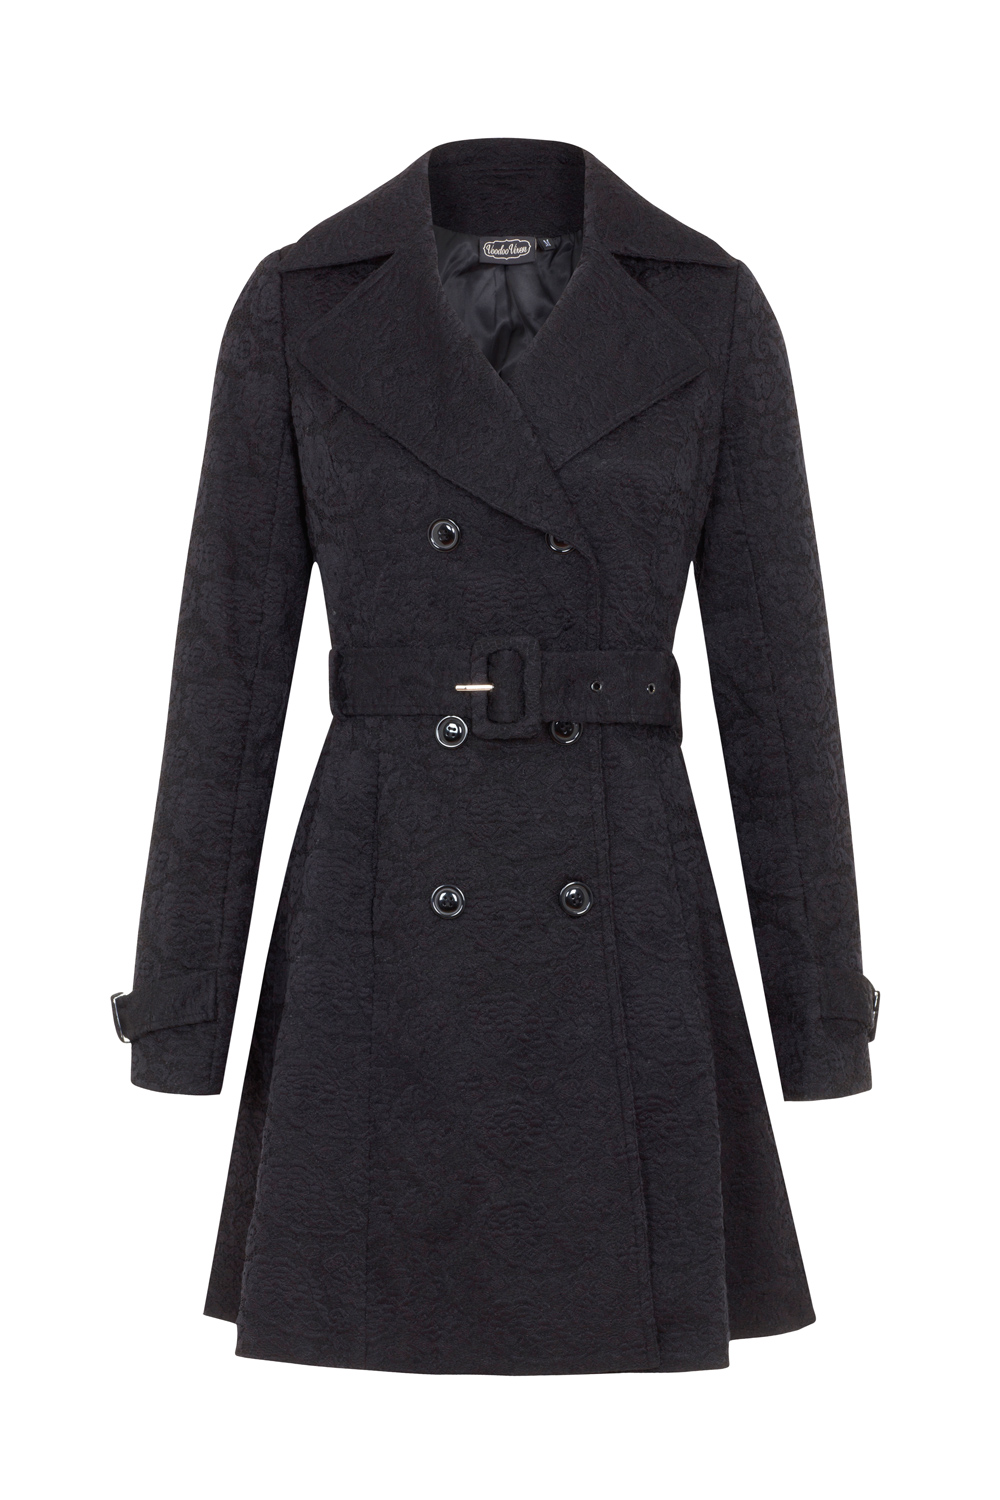 Susan Black Trench Coat With Lace Overlay | Vintage Inspired Fashion ...